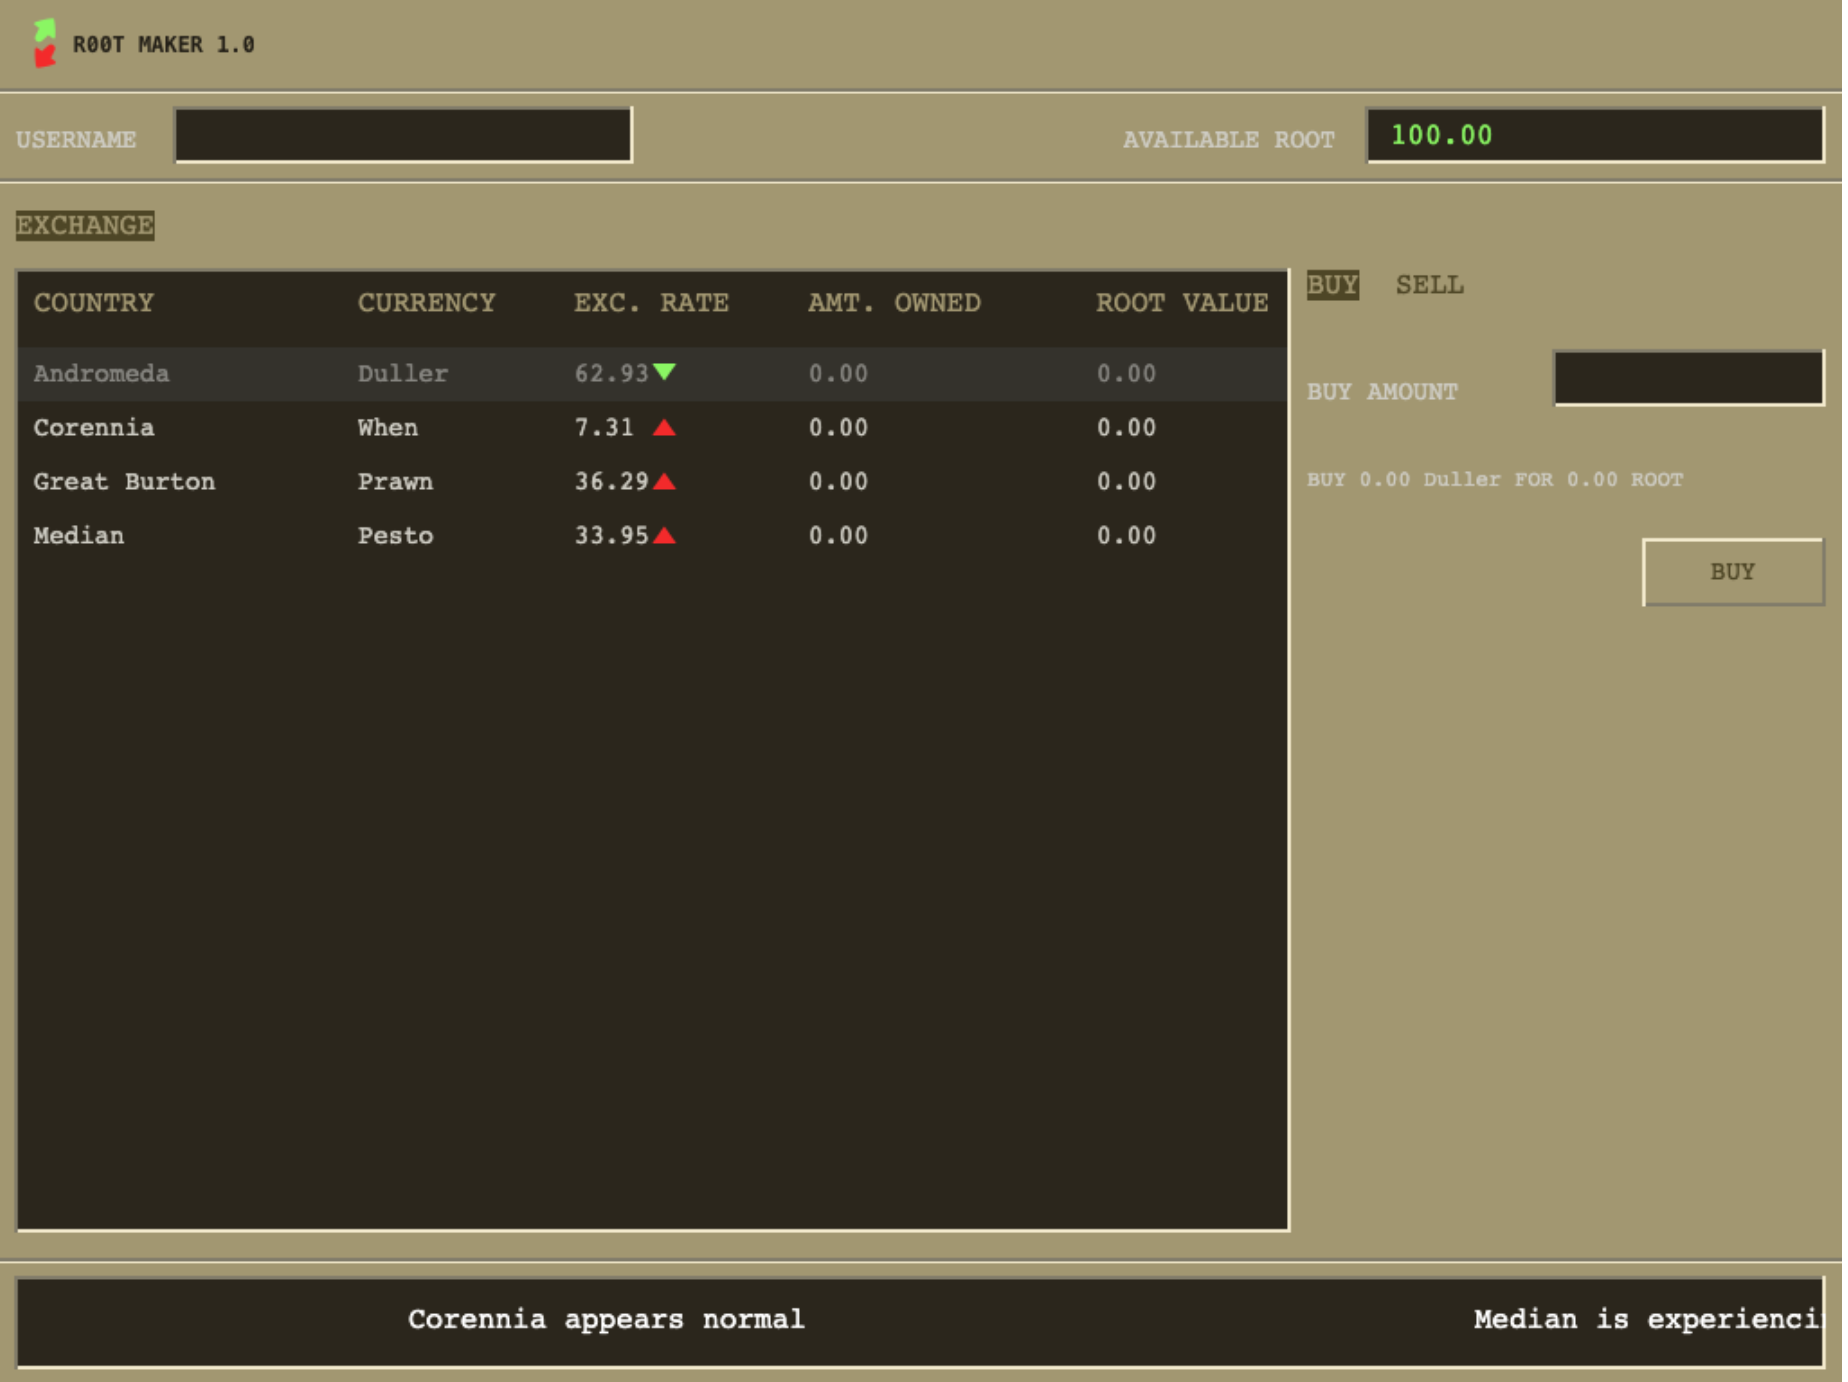 The trading screen of Root Maker 1.0